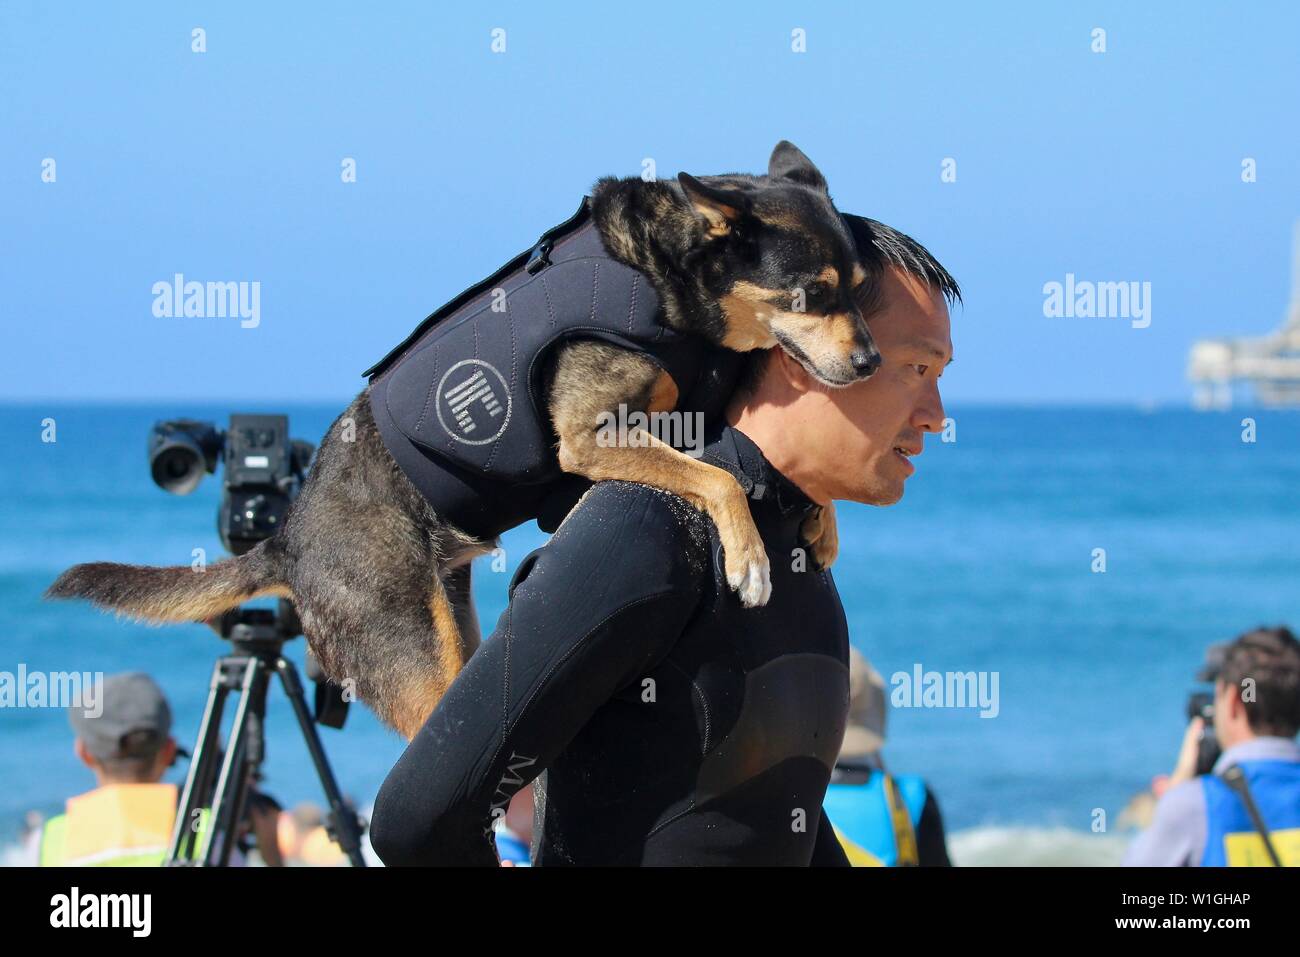 Abbie the Australian kelpie surfing dog on the beach with her person during a dog surfing event in Huntington Beach California Stock Photo